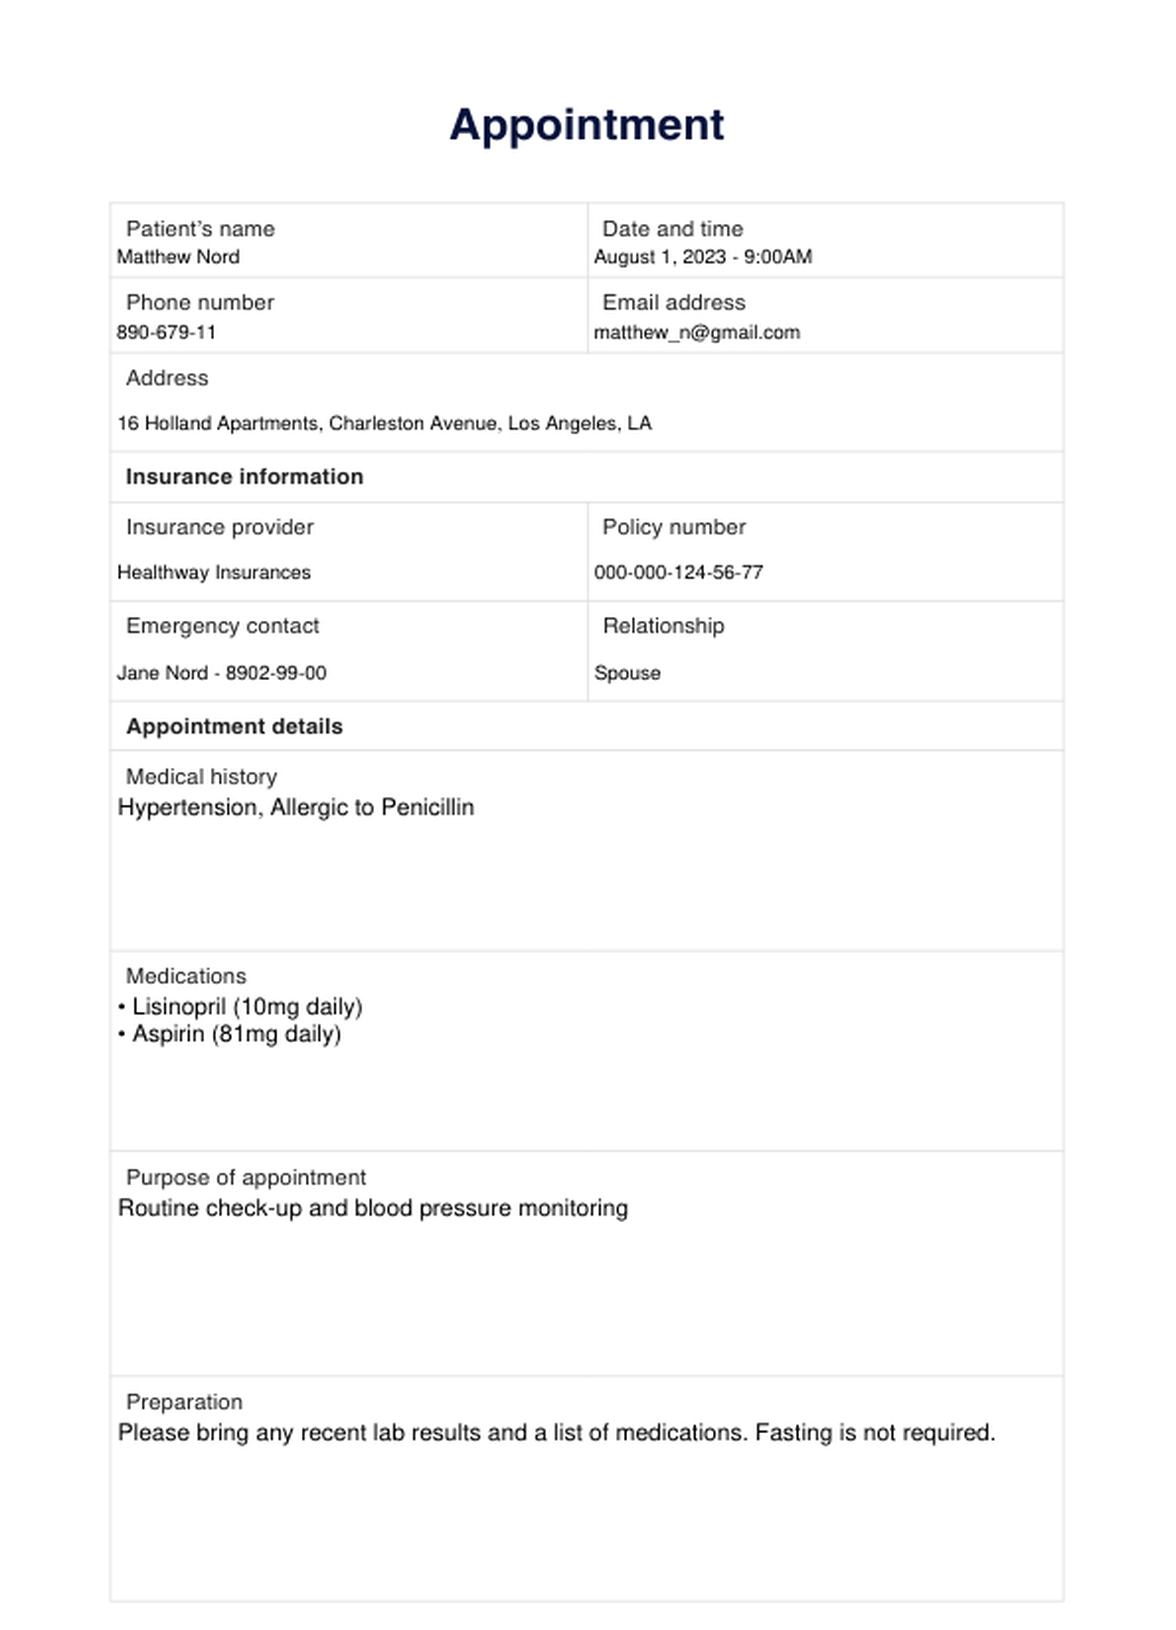 Appointment Template PDF Example